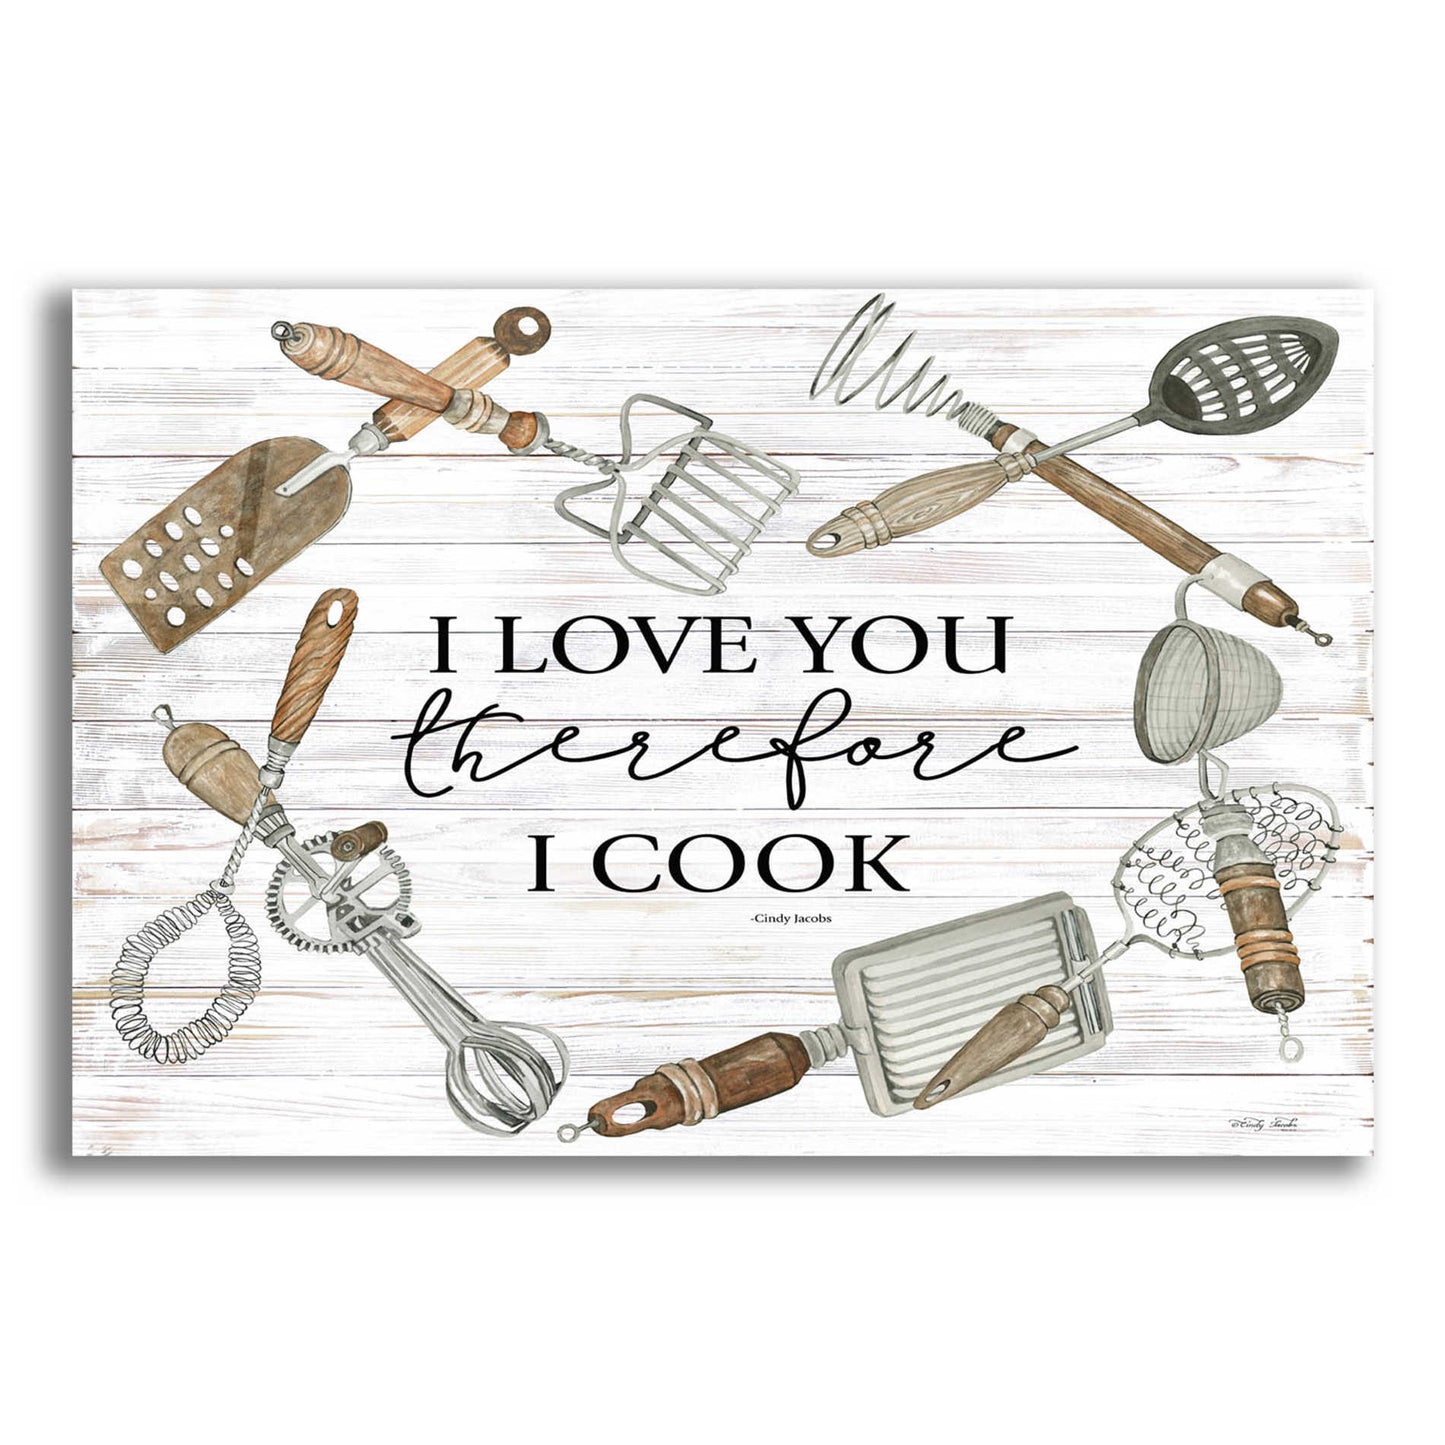 Epic Art 'I Love You Therefore I Cook' by Cindy Jacobs, Acrylic Glass Wall Art